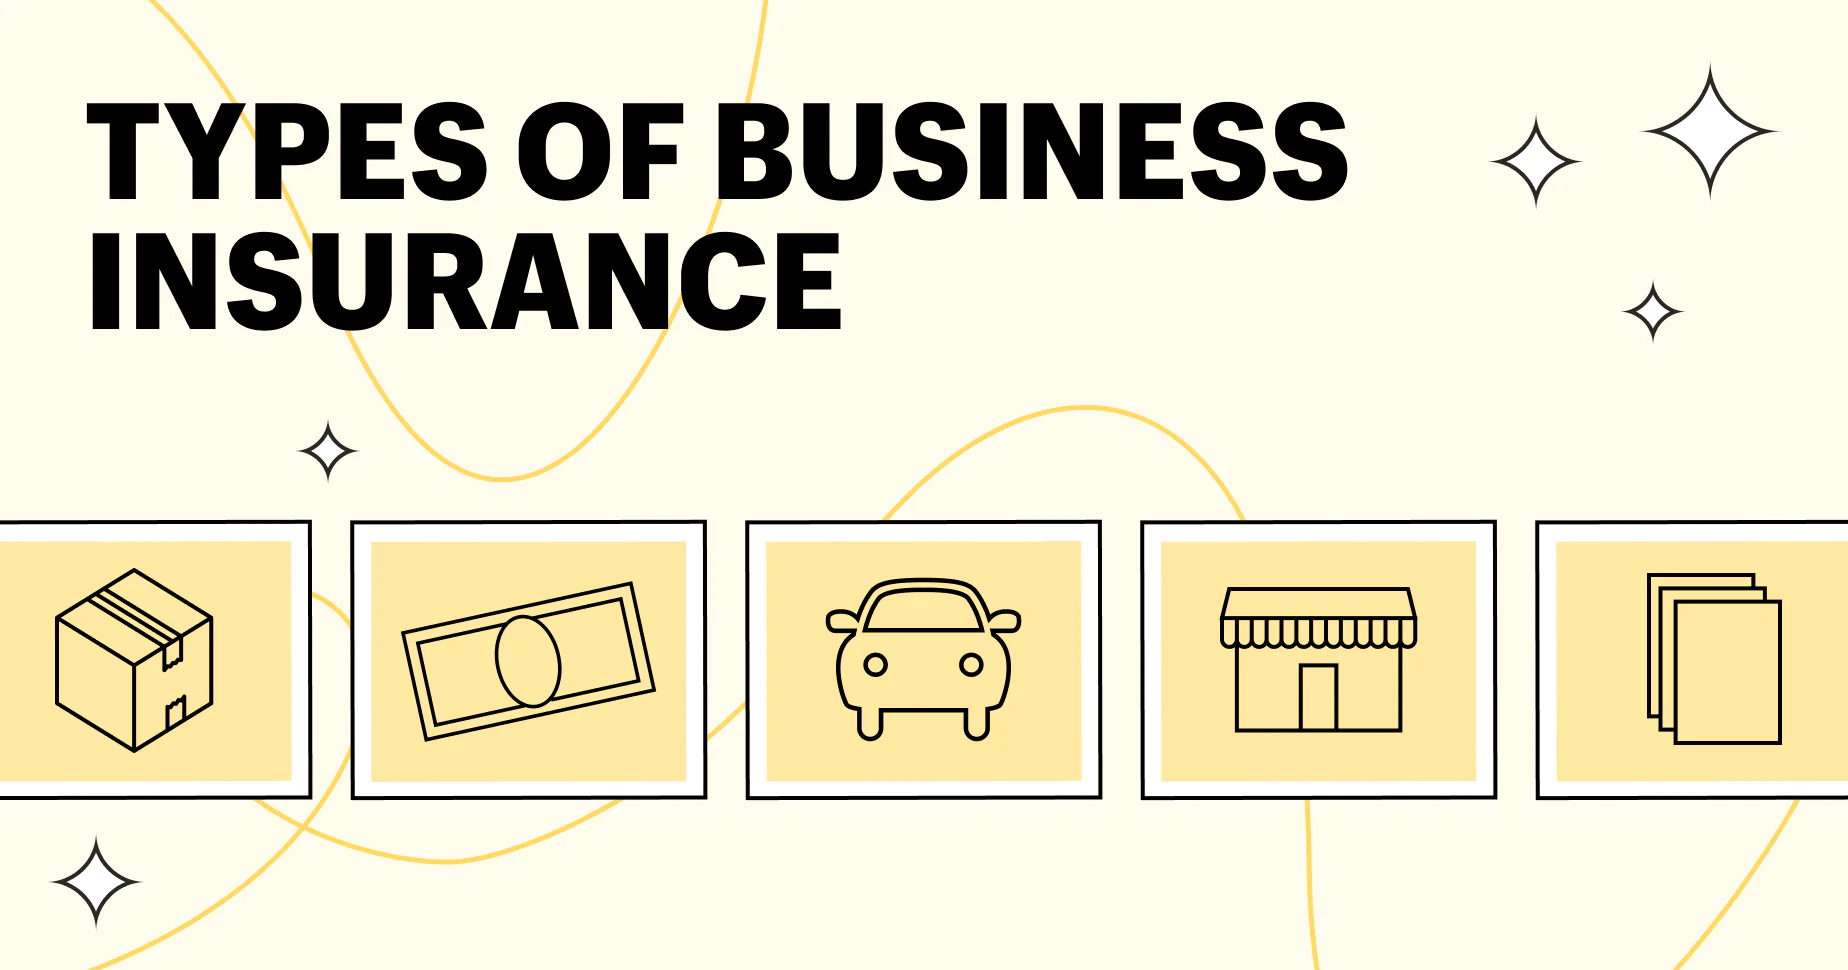 5 Types of Business Insurance For Small Businesses